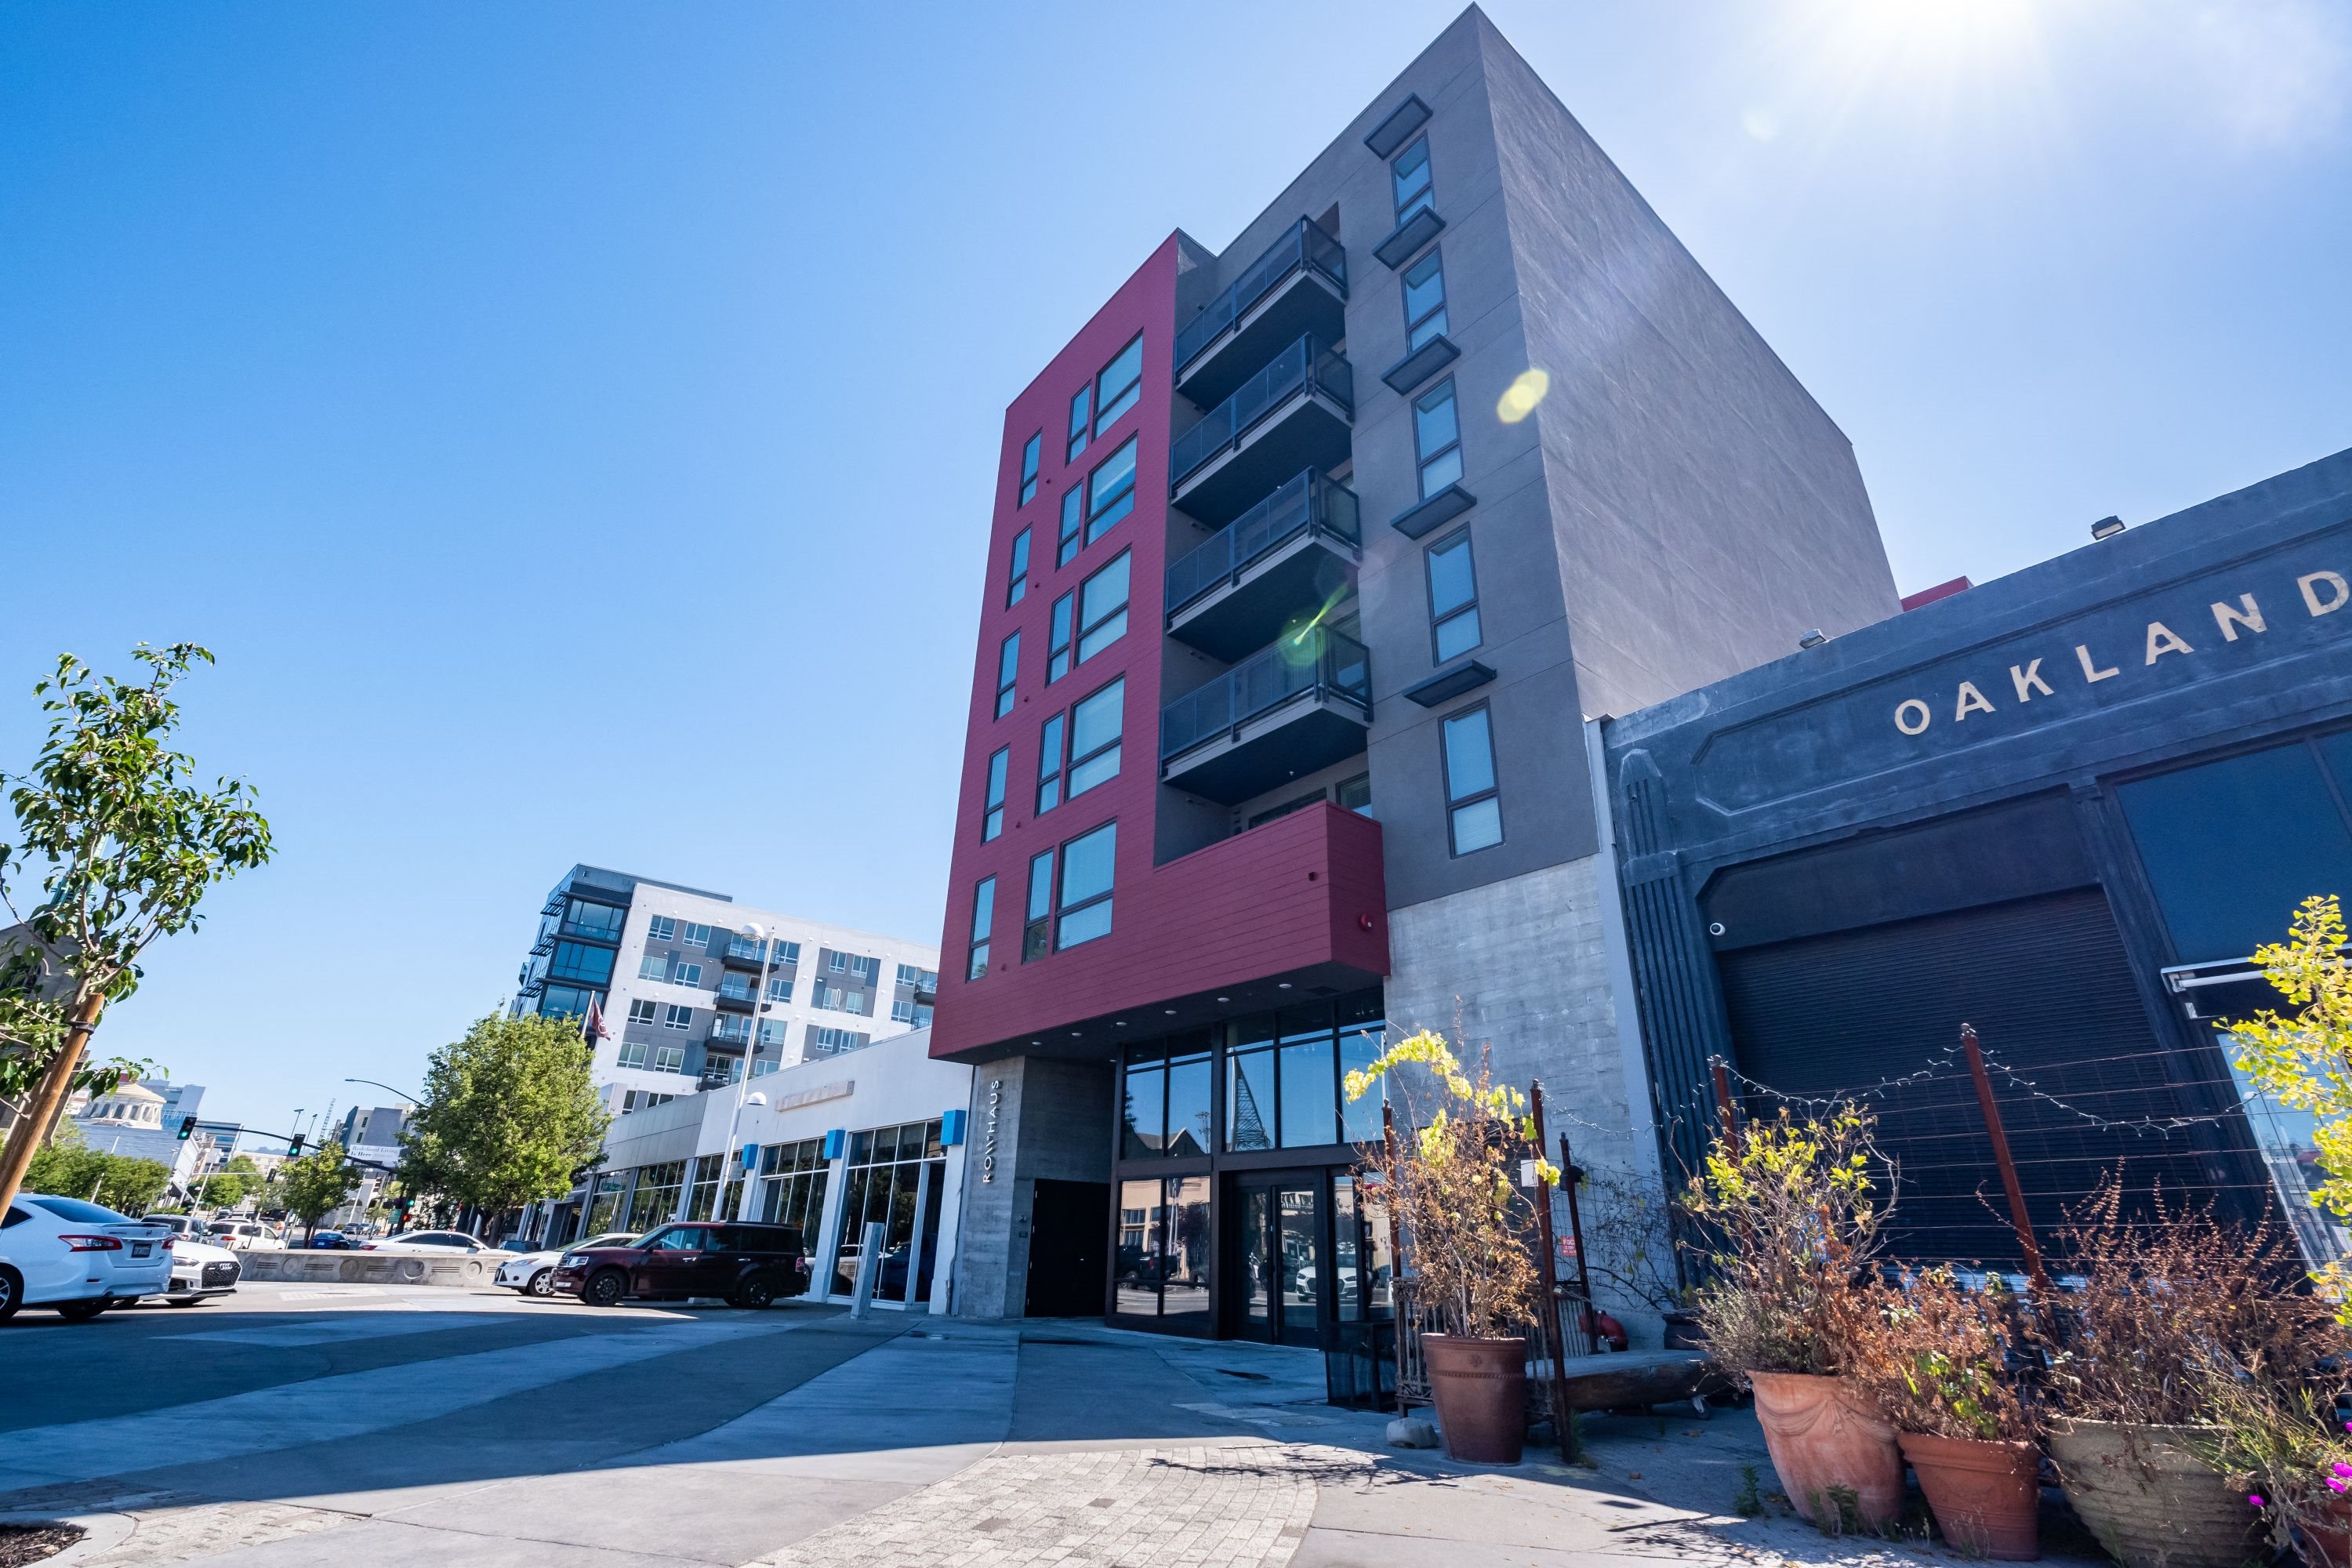 Upland Oakland, CA Apartments – Rowhaus Apartments Exterior Building With a Beautiful Landscaping in the Heart of Uptown